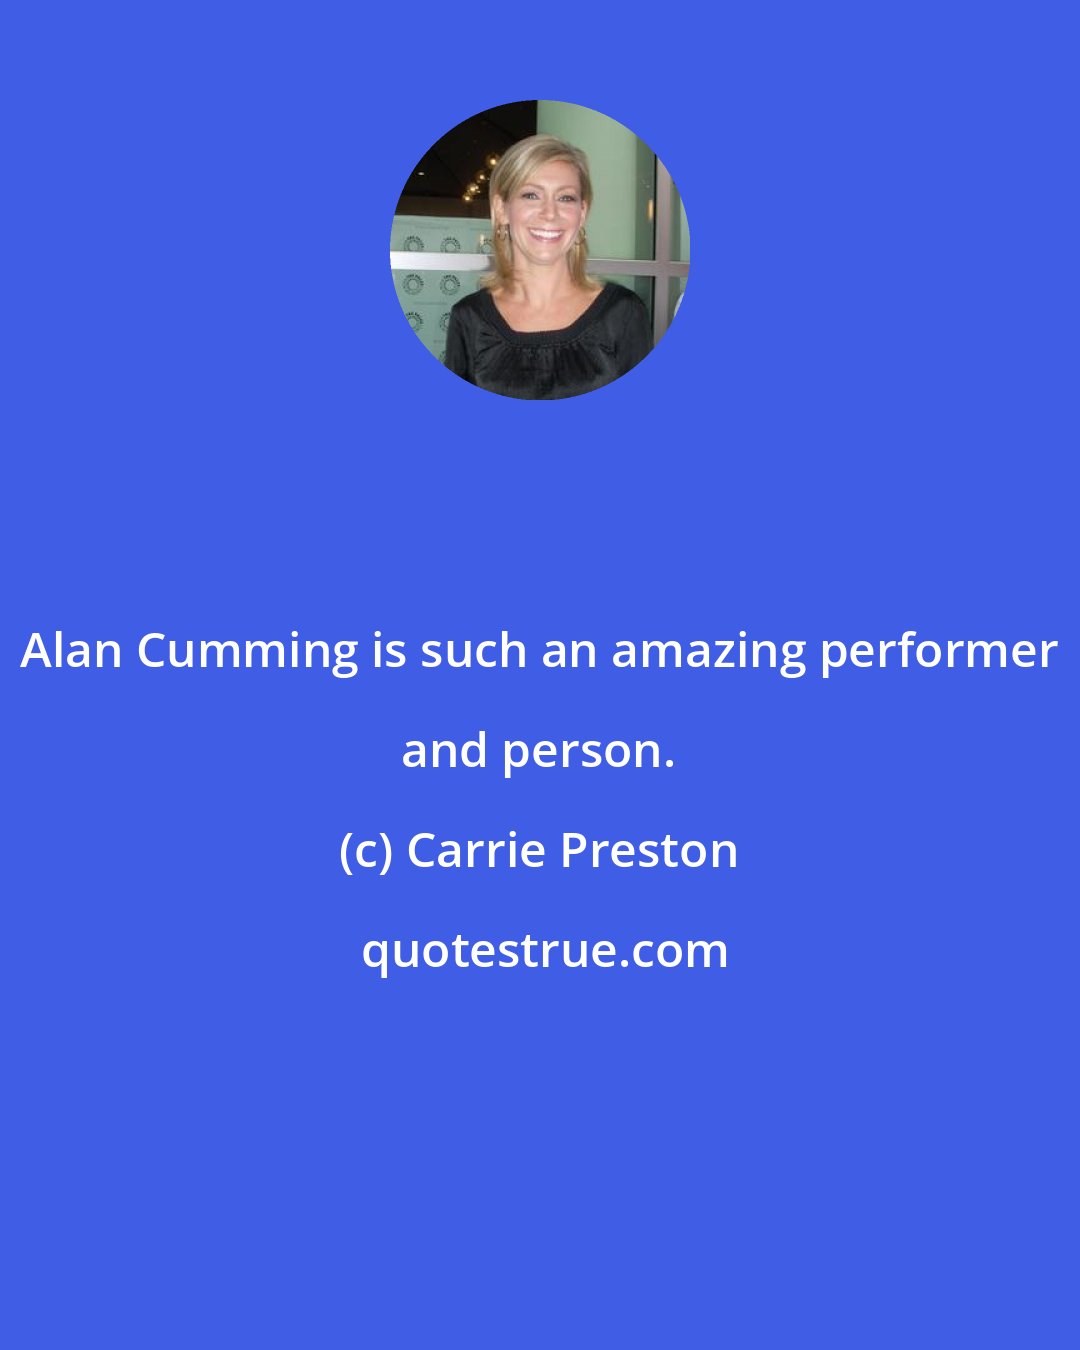 Carrie Preston: Alan Cumming is such an amazing performer and person.